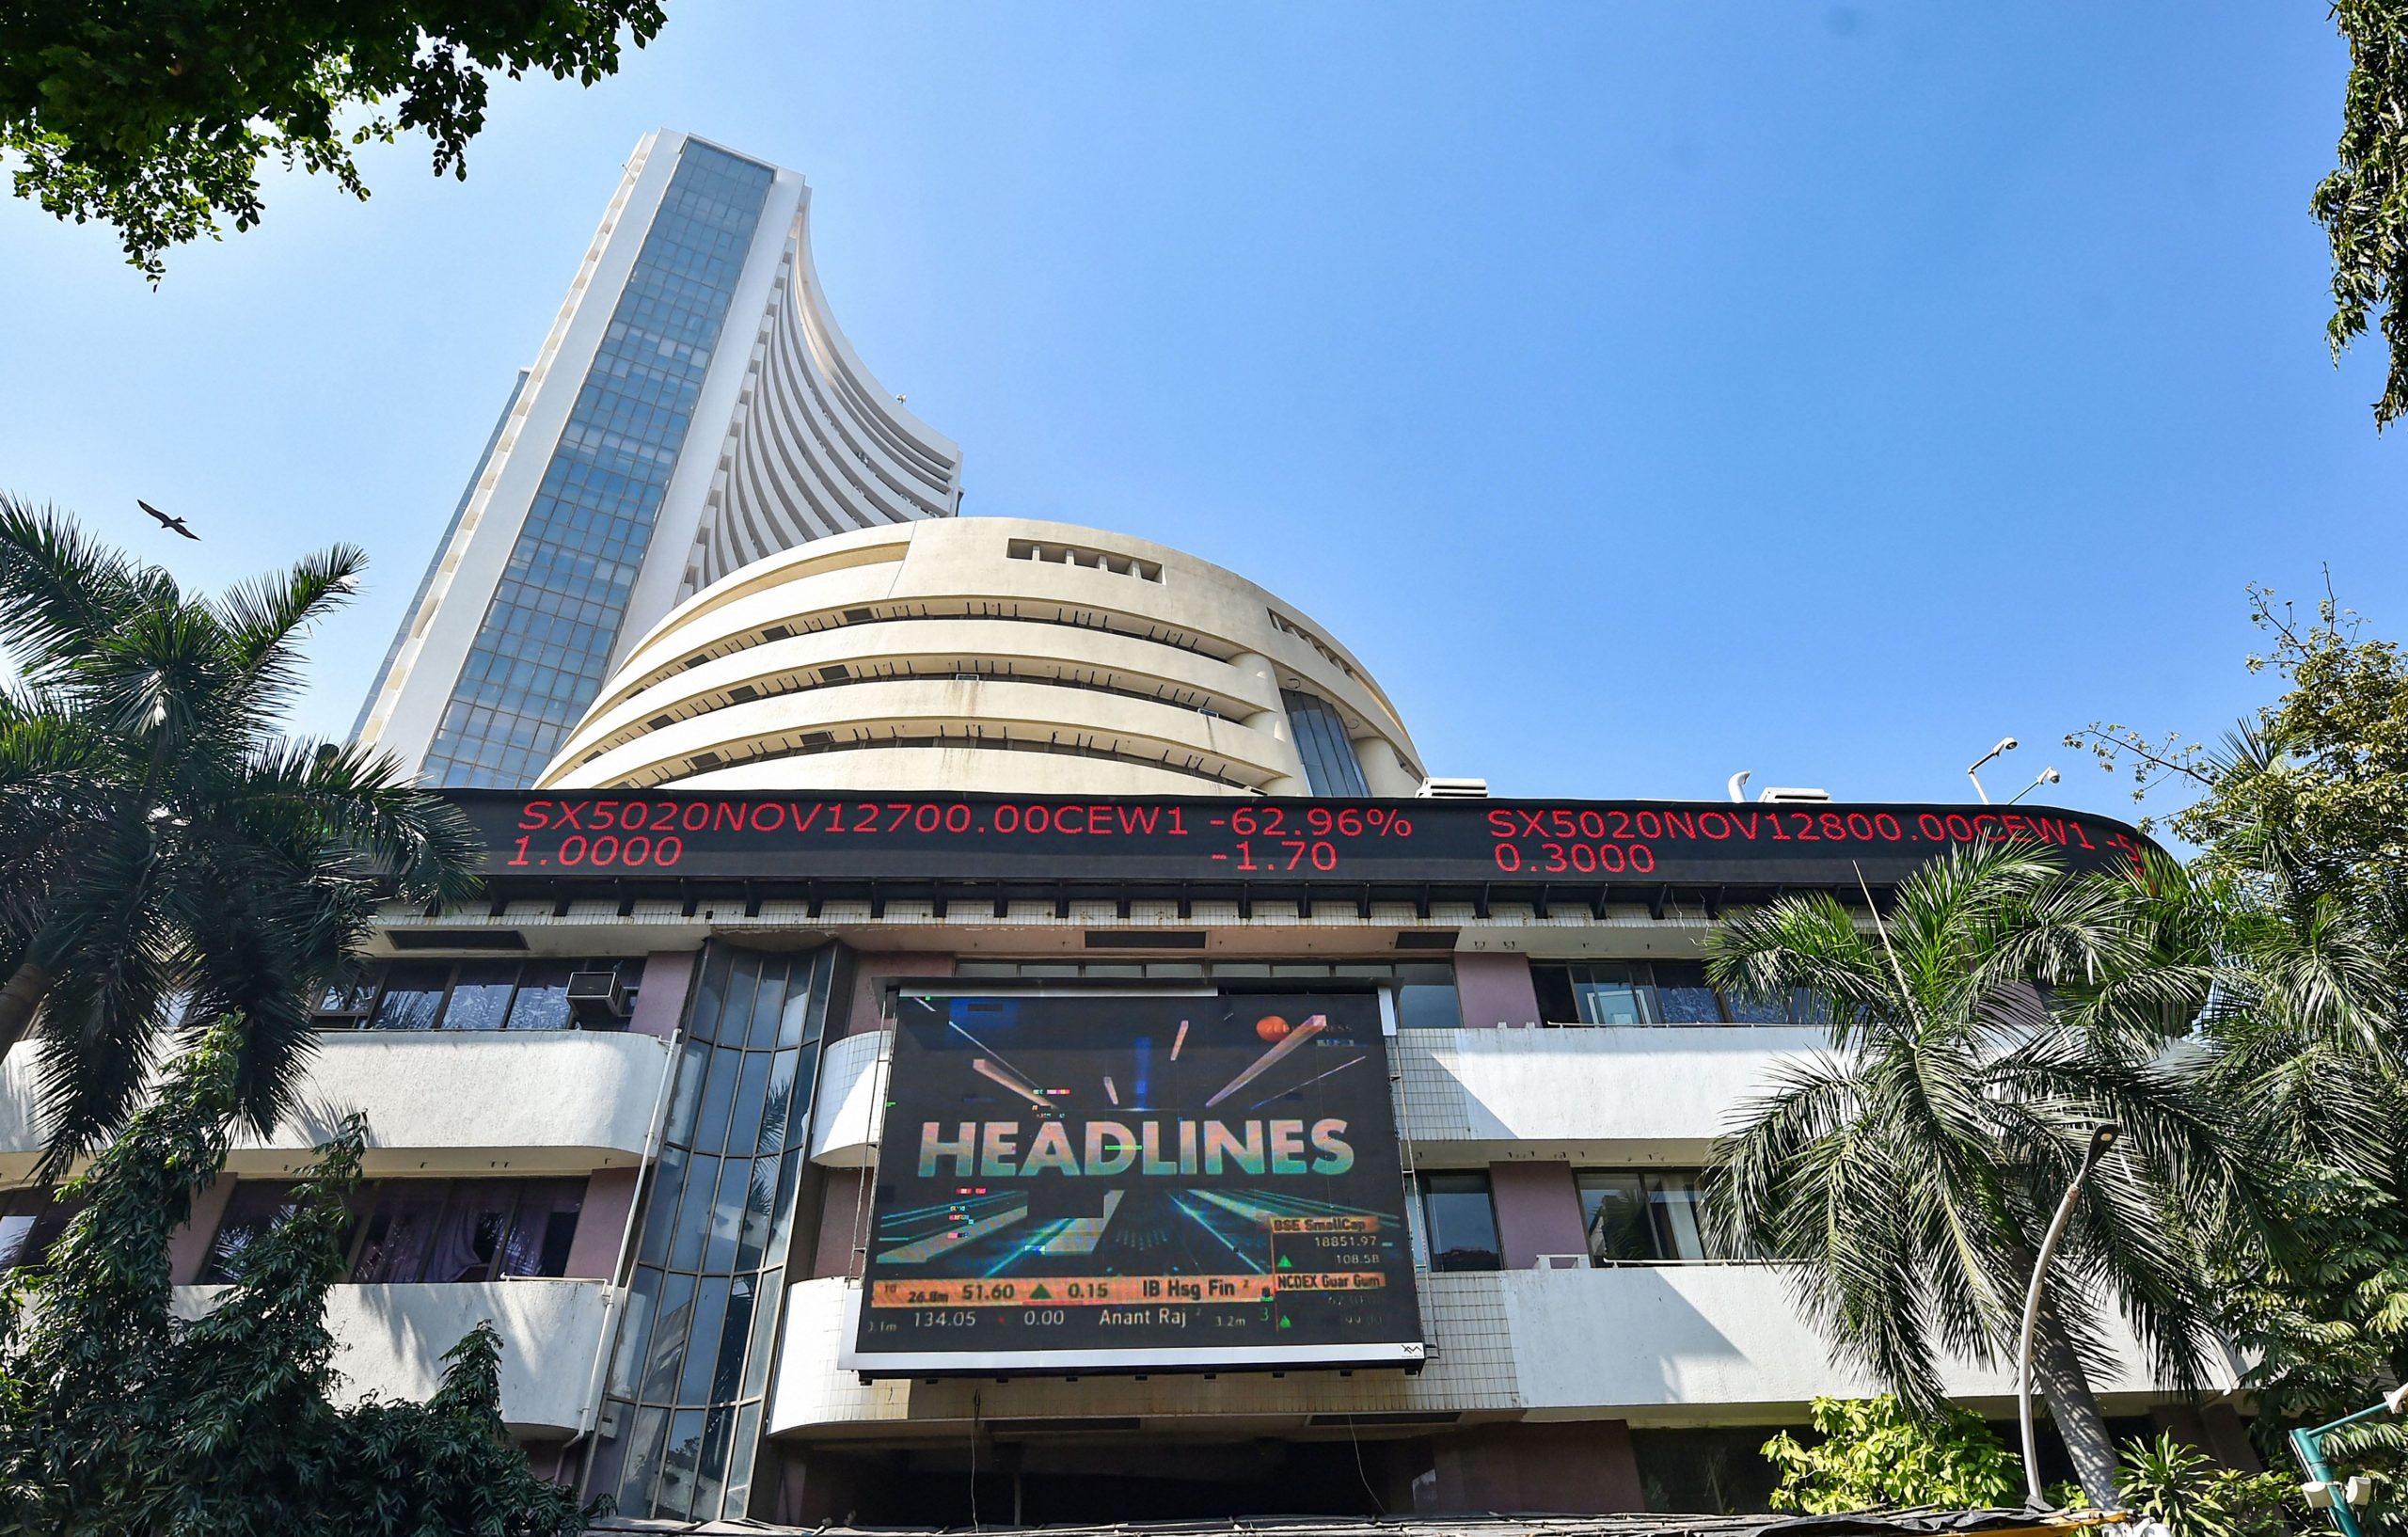 Trending Stocks: TTML, Vodafone Idea, Delta Corp, DLF and others in news today